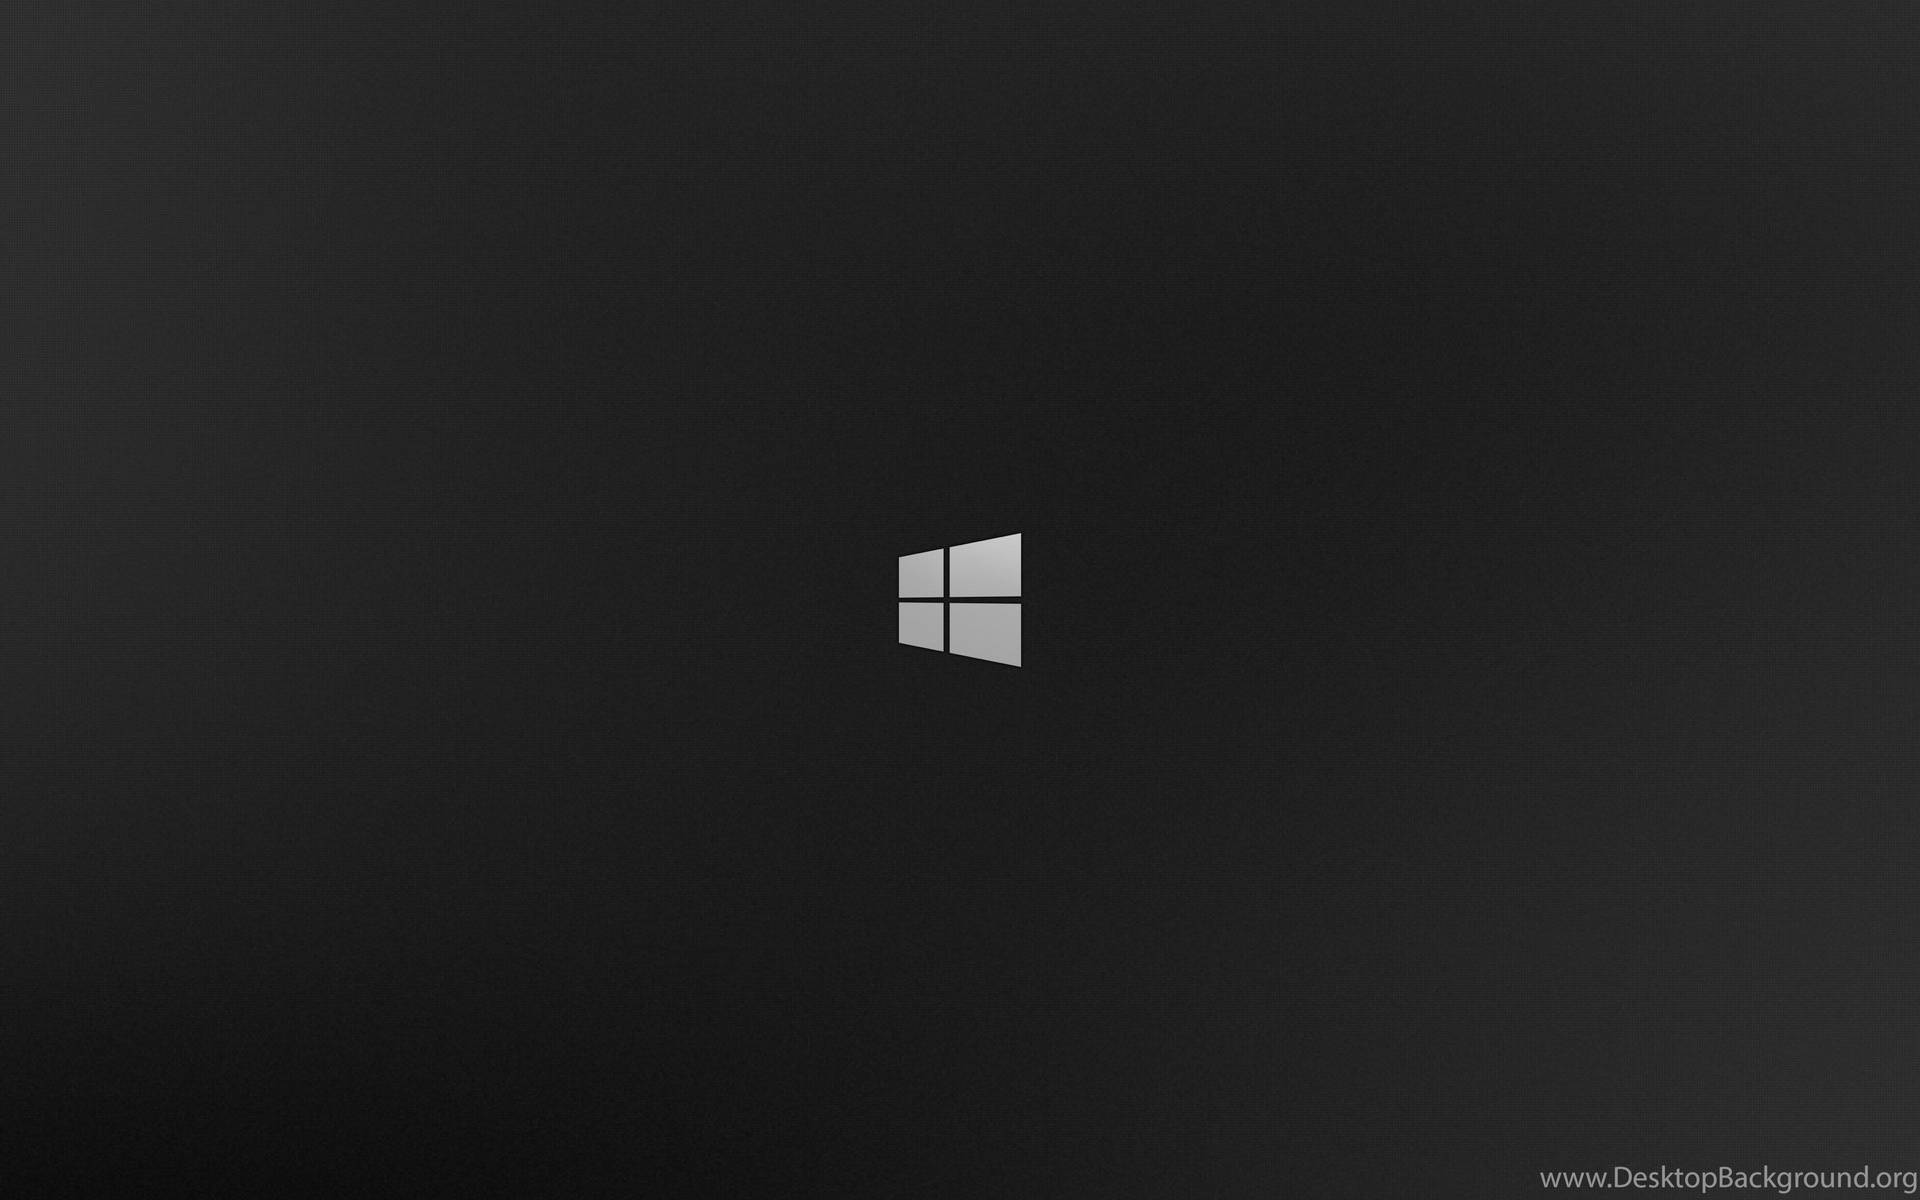 Windows 10 3840X2400 Wallpaper and Background Image